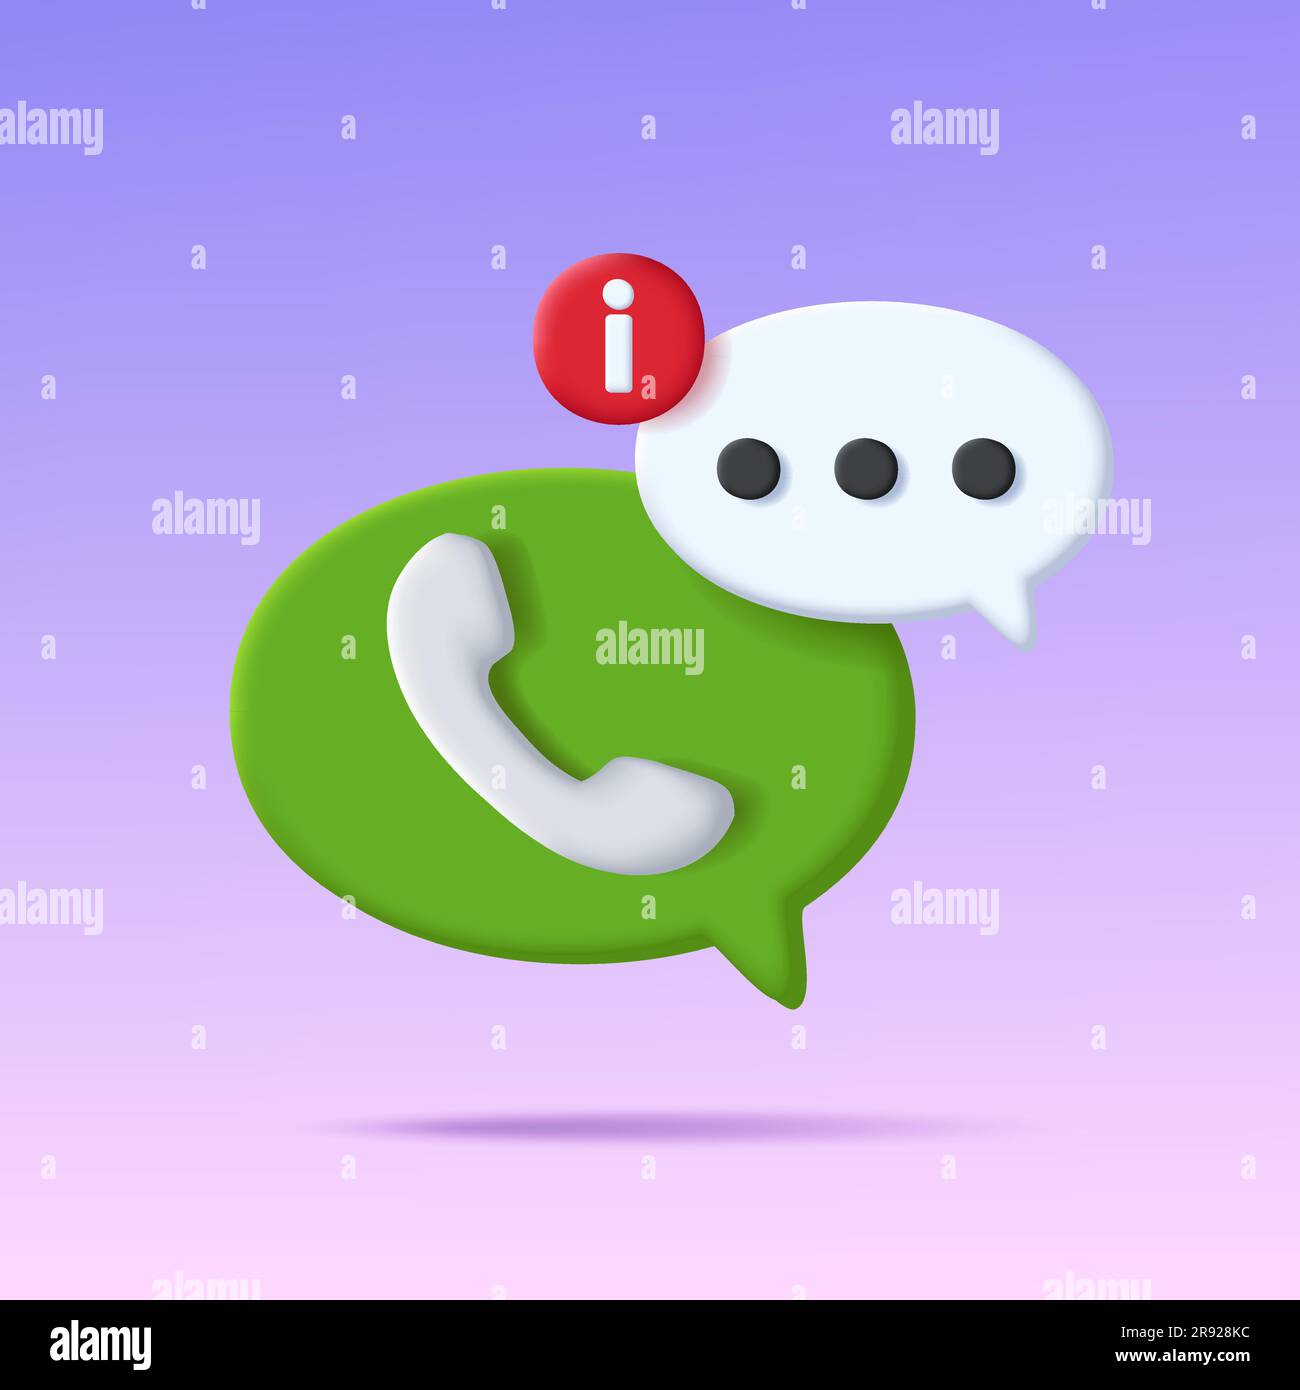 Call center support 3d shape speech bubble with telephone tube icon, digital illustration Stock Vector